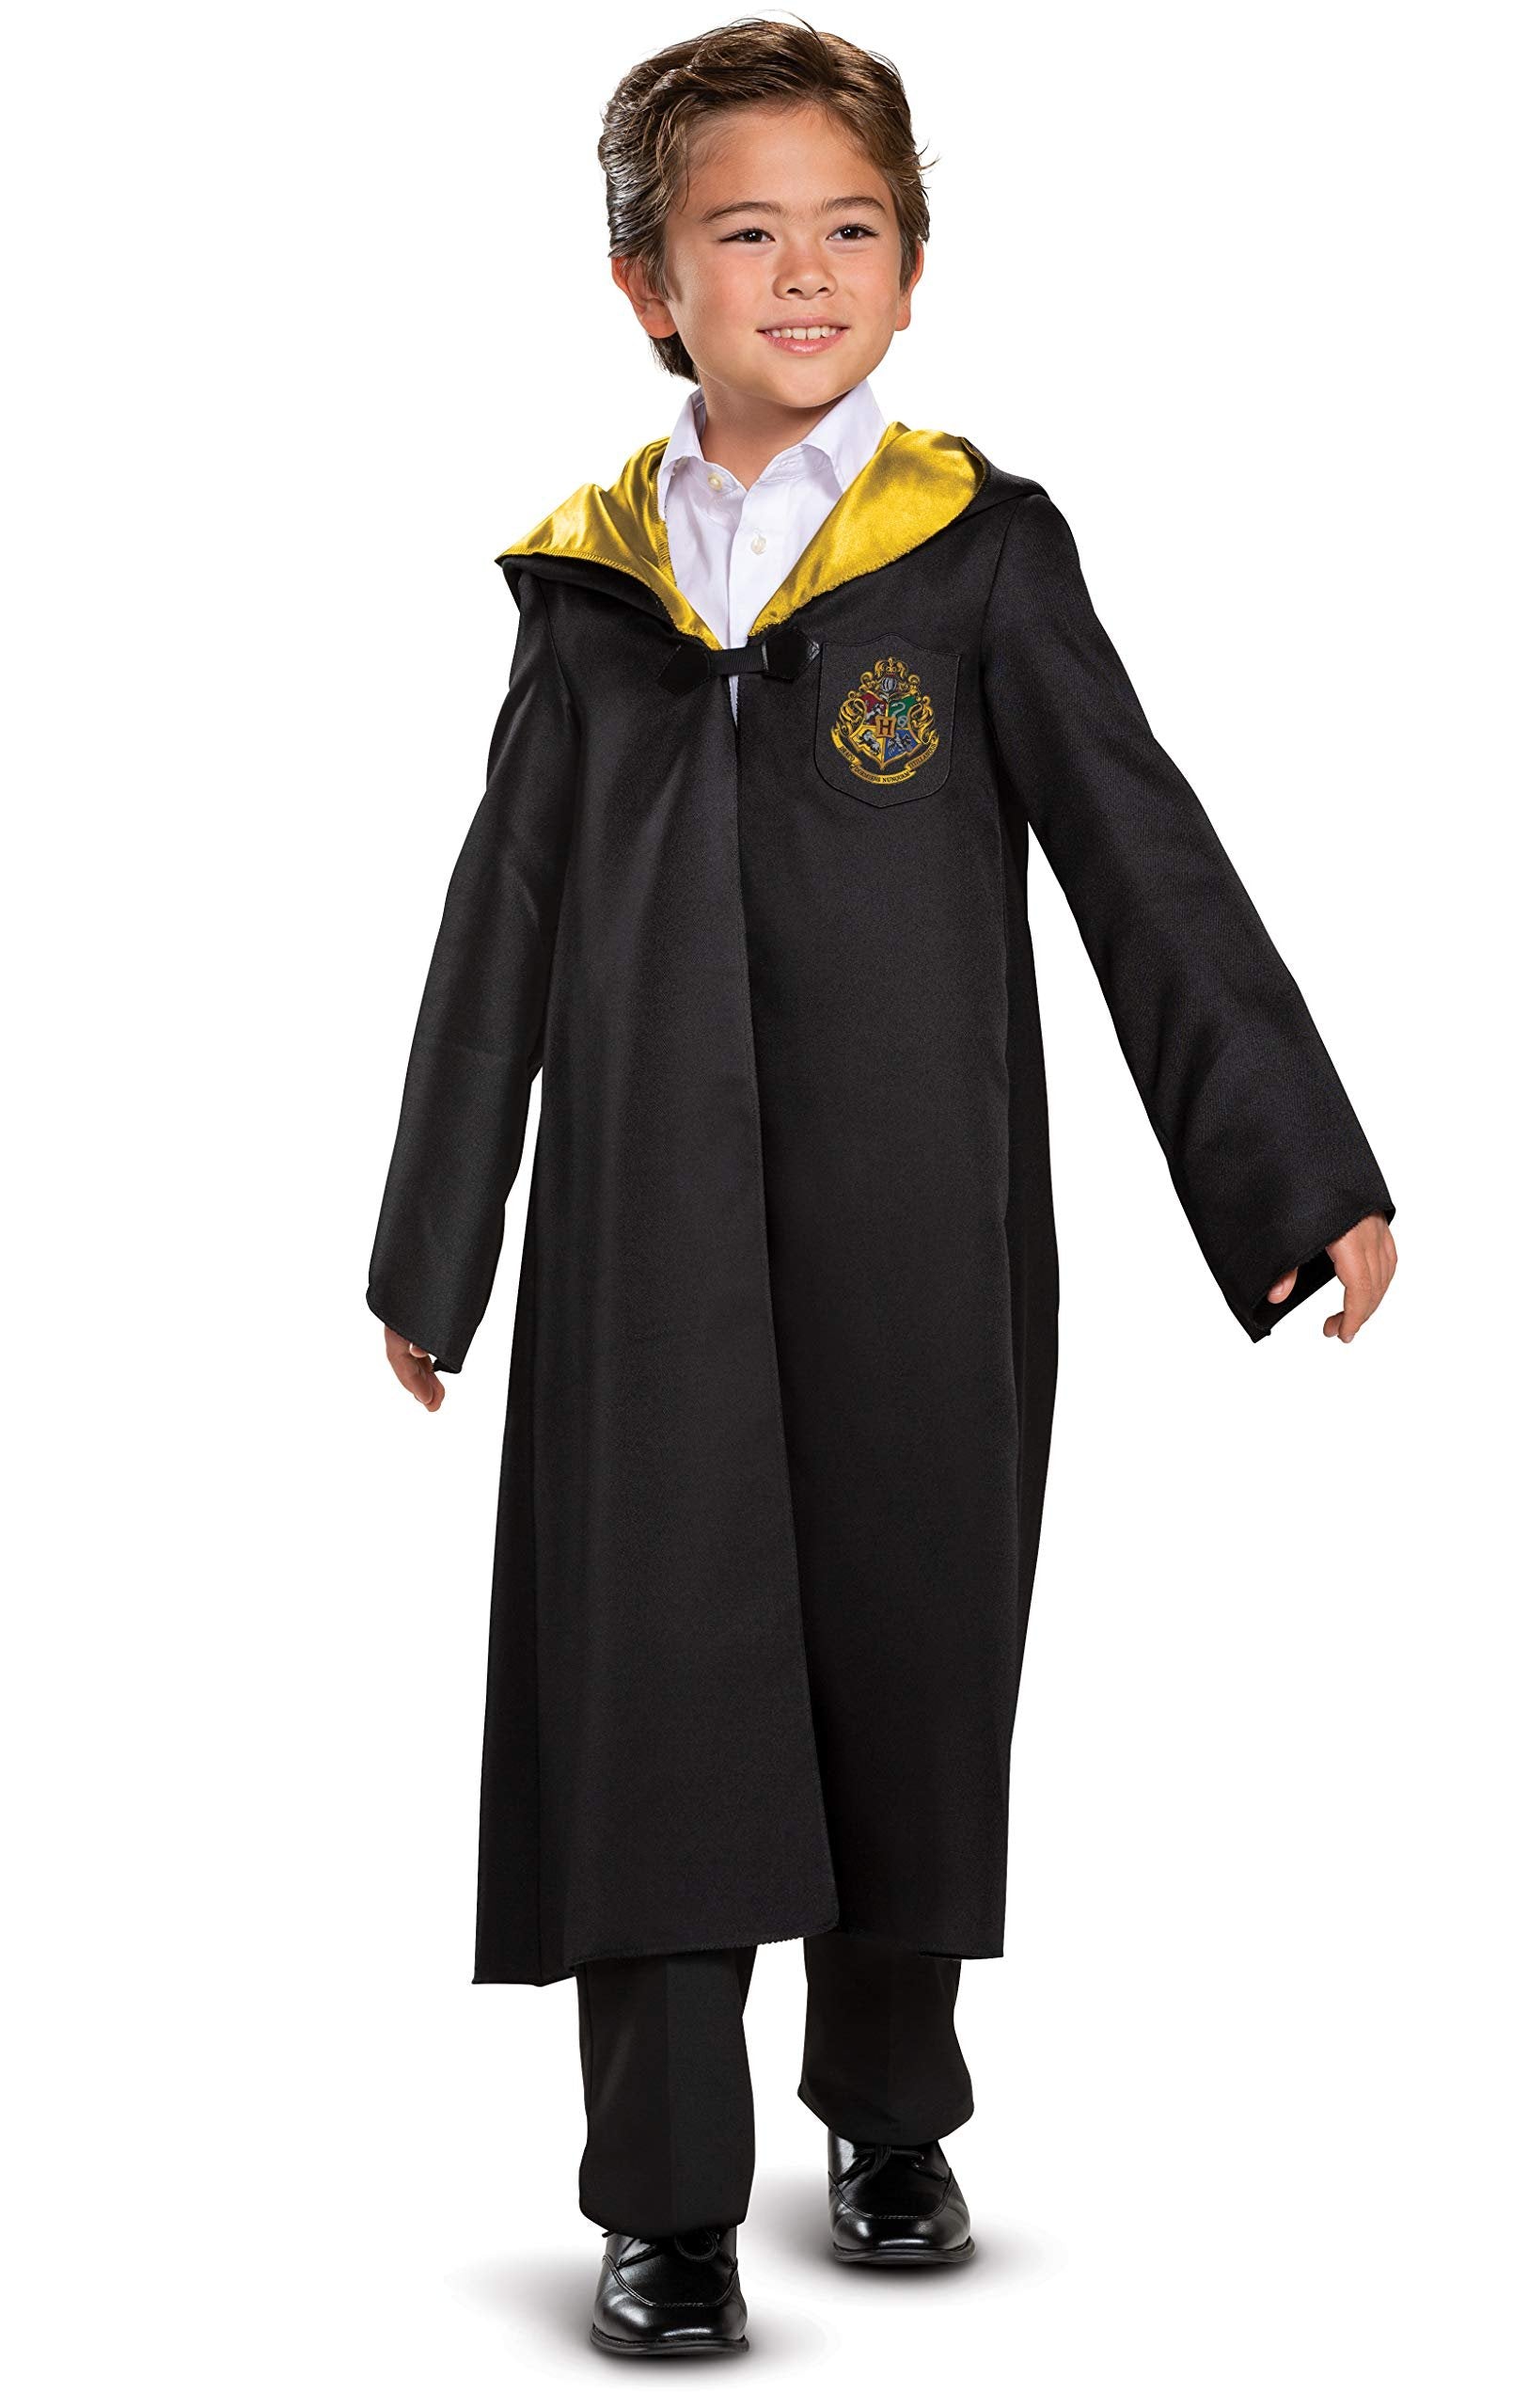 Disguise Harry Potter Hogwarts Robe, Official Wizarding World Costume Robes, Classic Kids Size Dress Up Accessory, Child Size Medium (7-8), Black & Gold